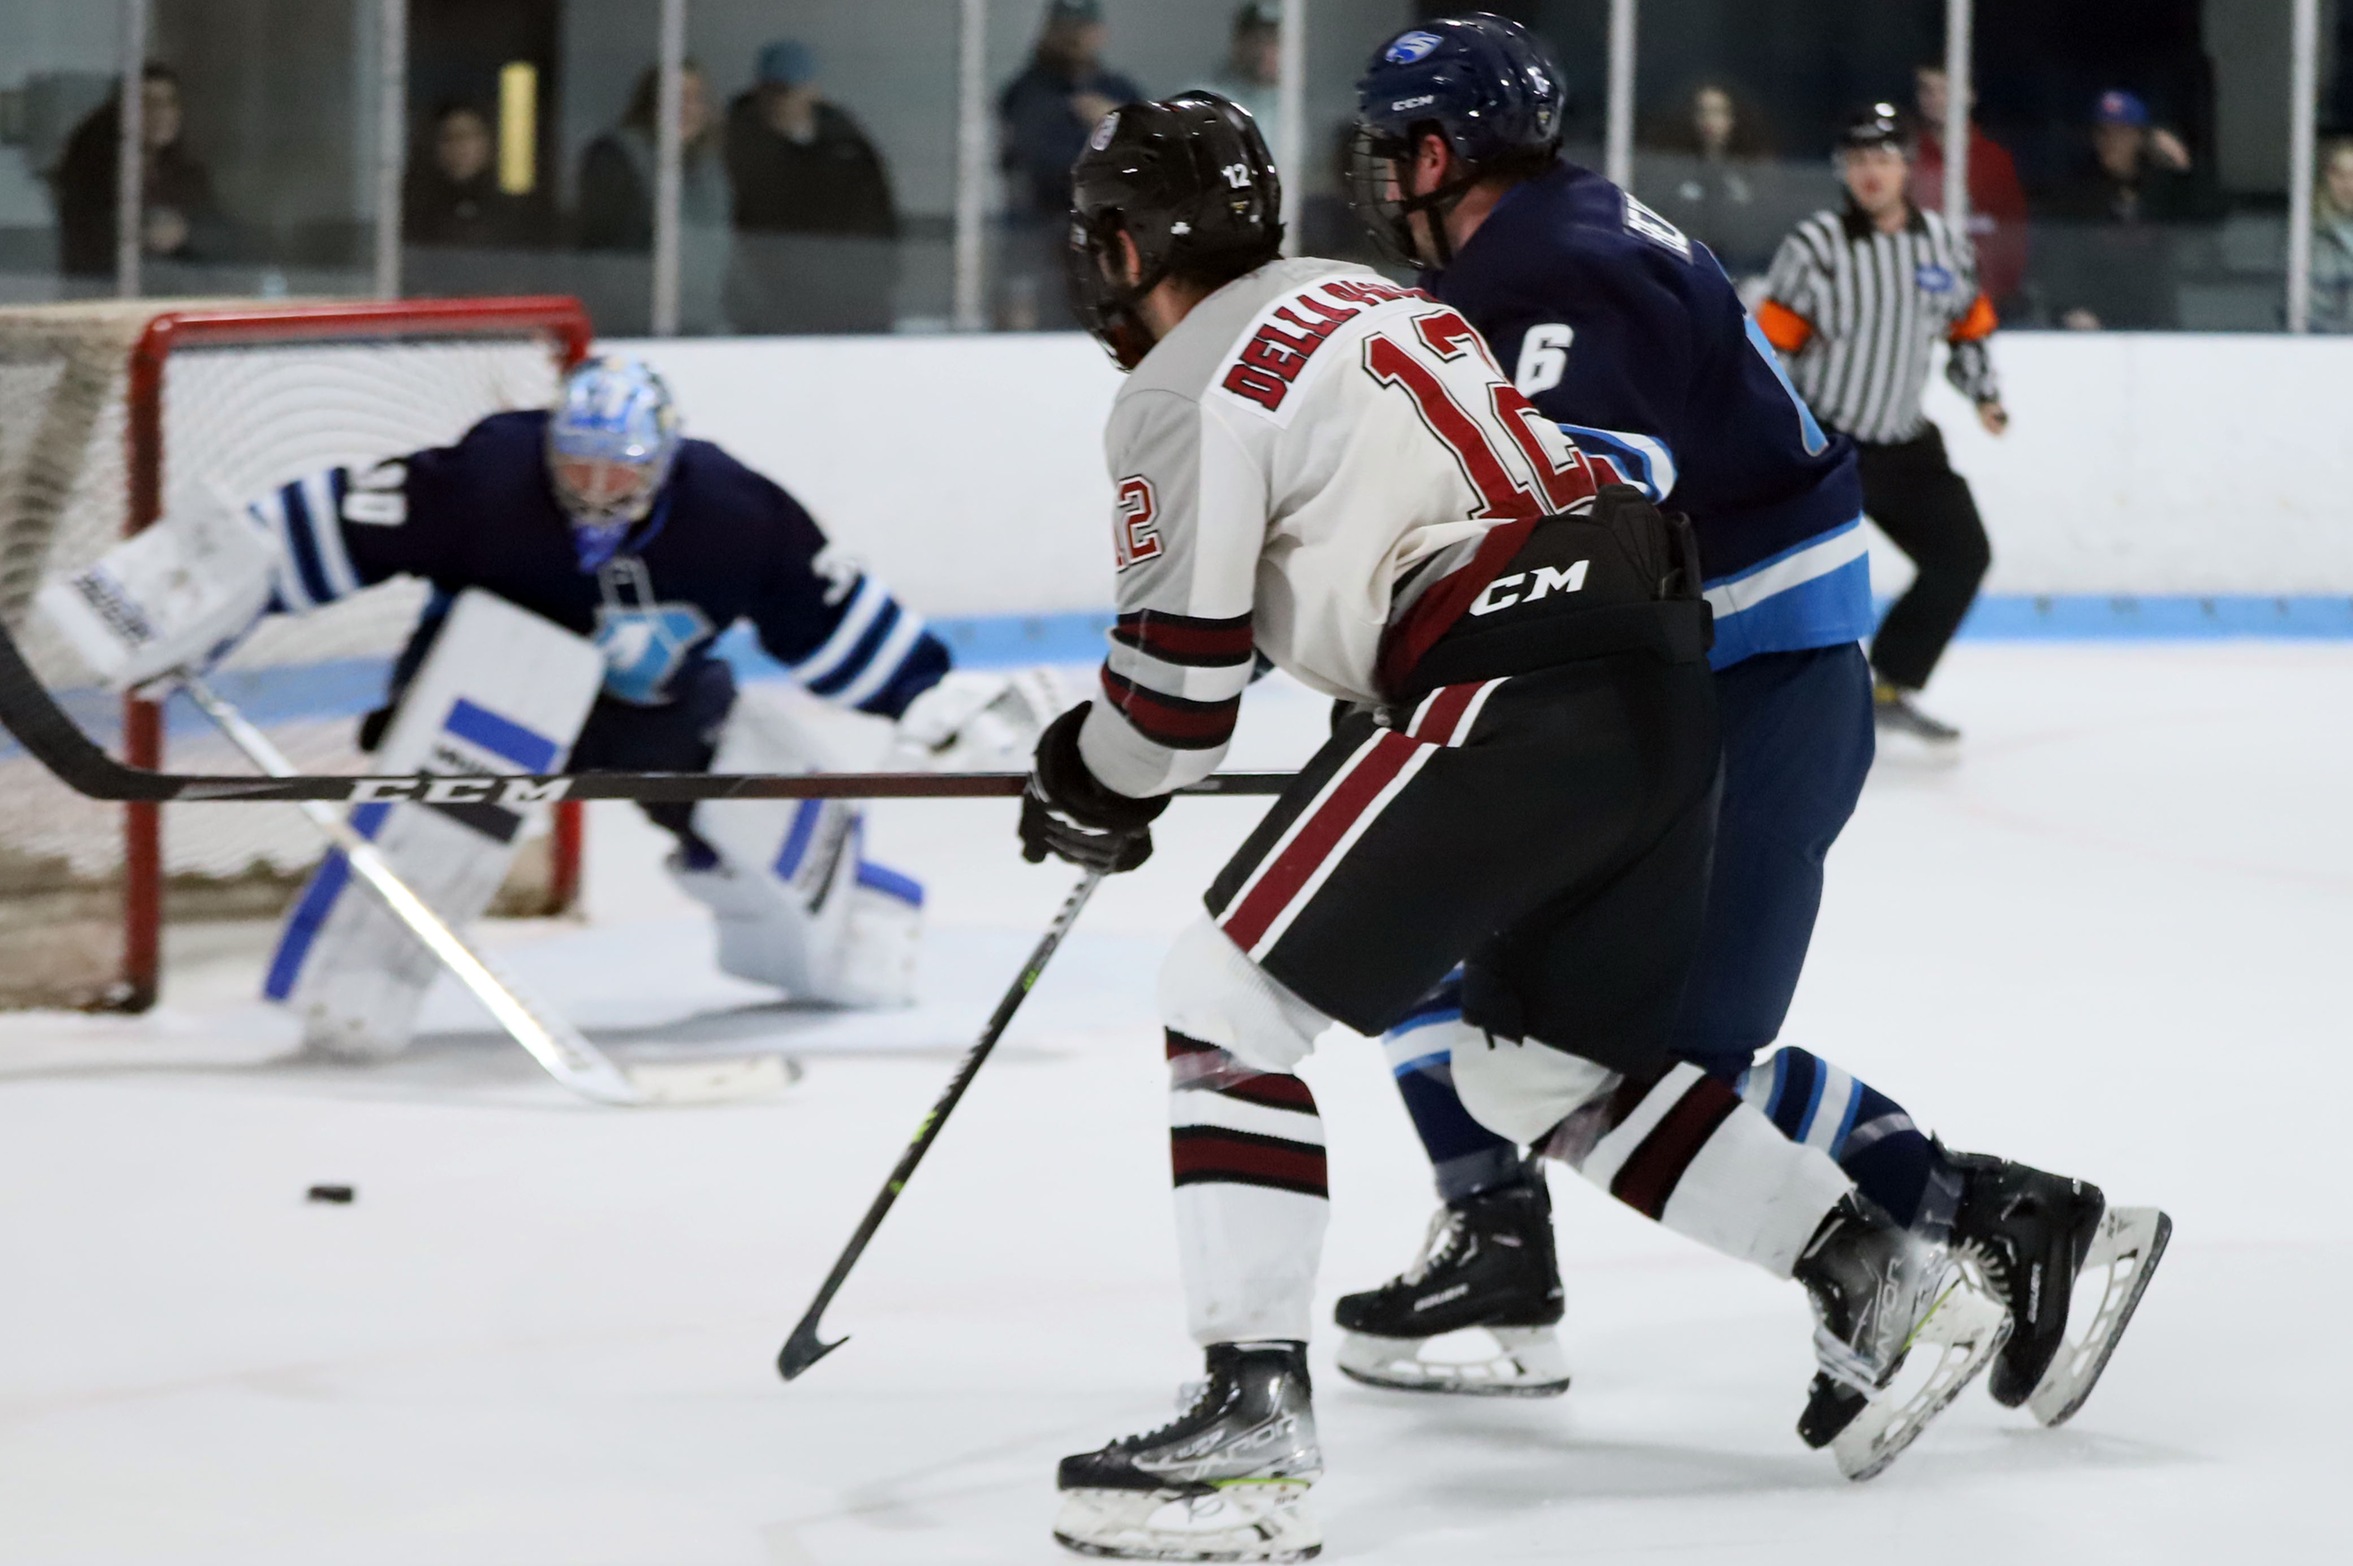 Men’s Hockey Drops Close One in Overtime to #13 Curry College